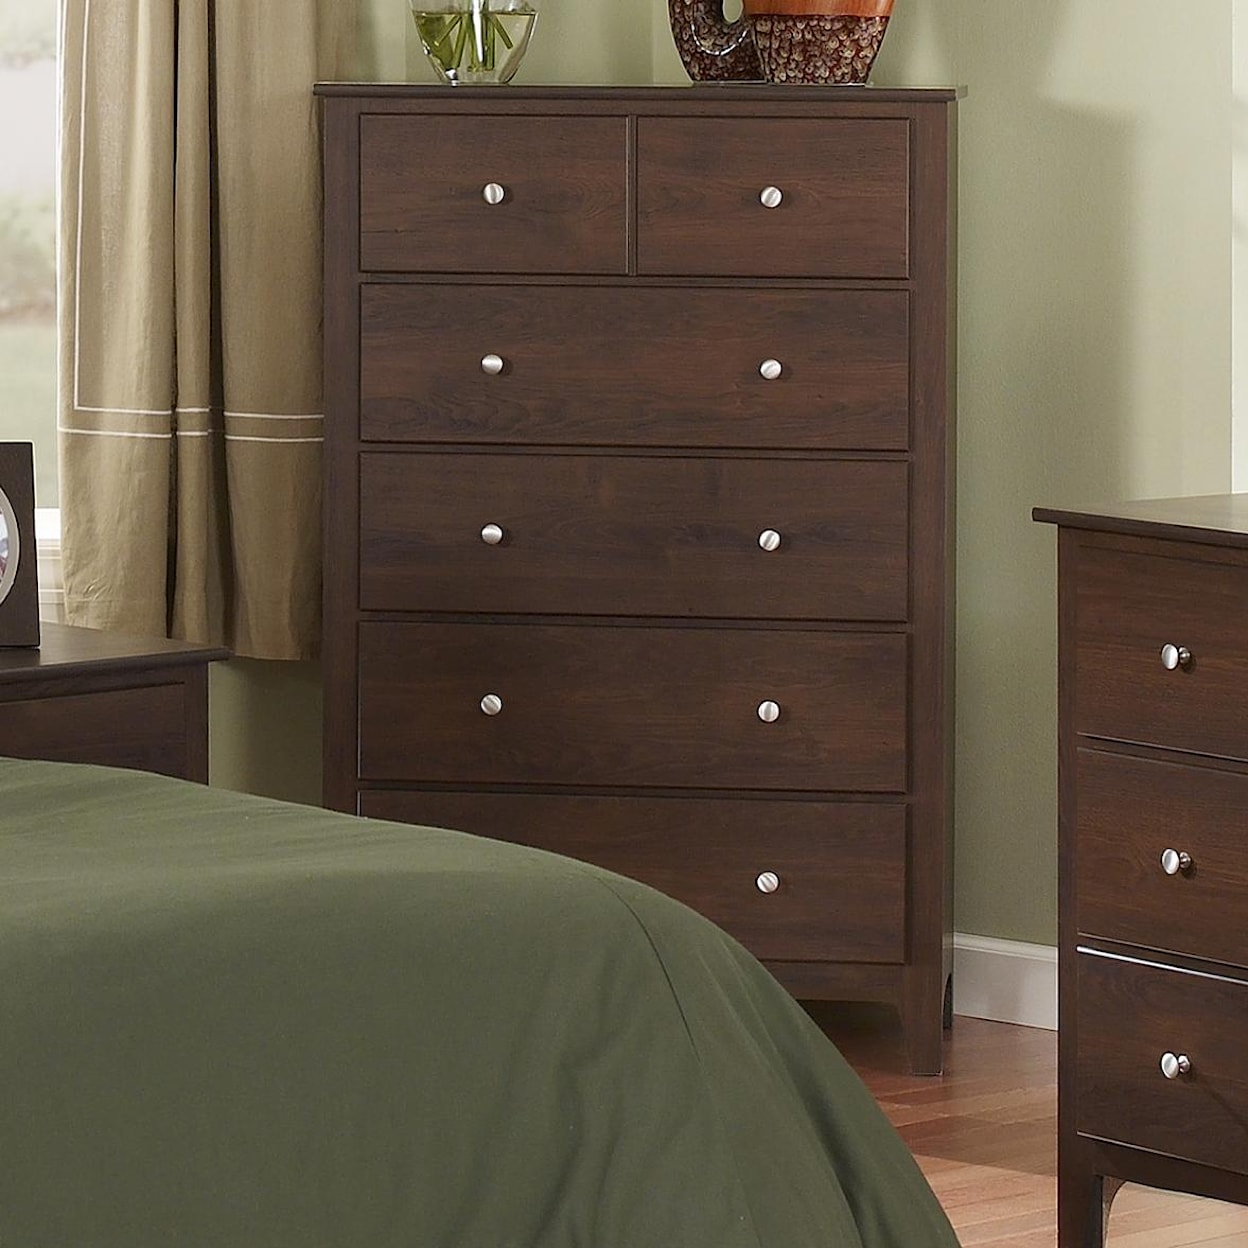 Perdue 60000 Series 5-Drawer Chest